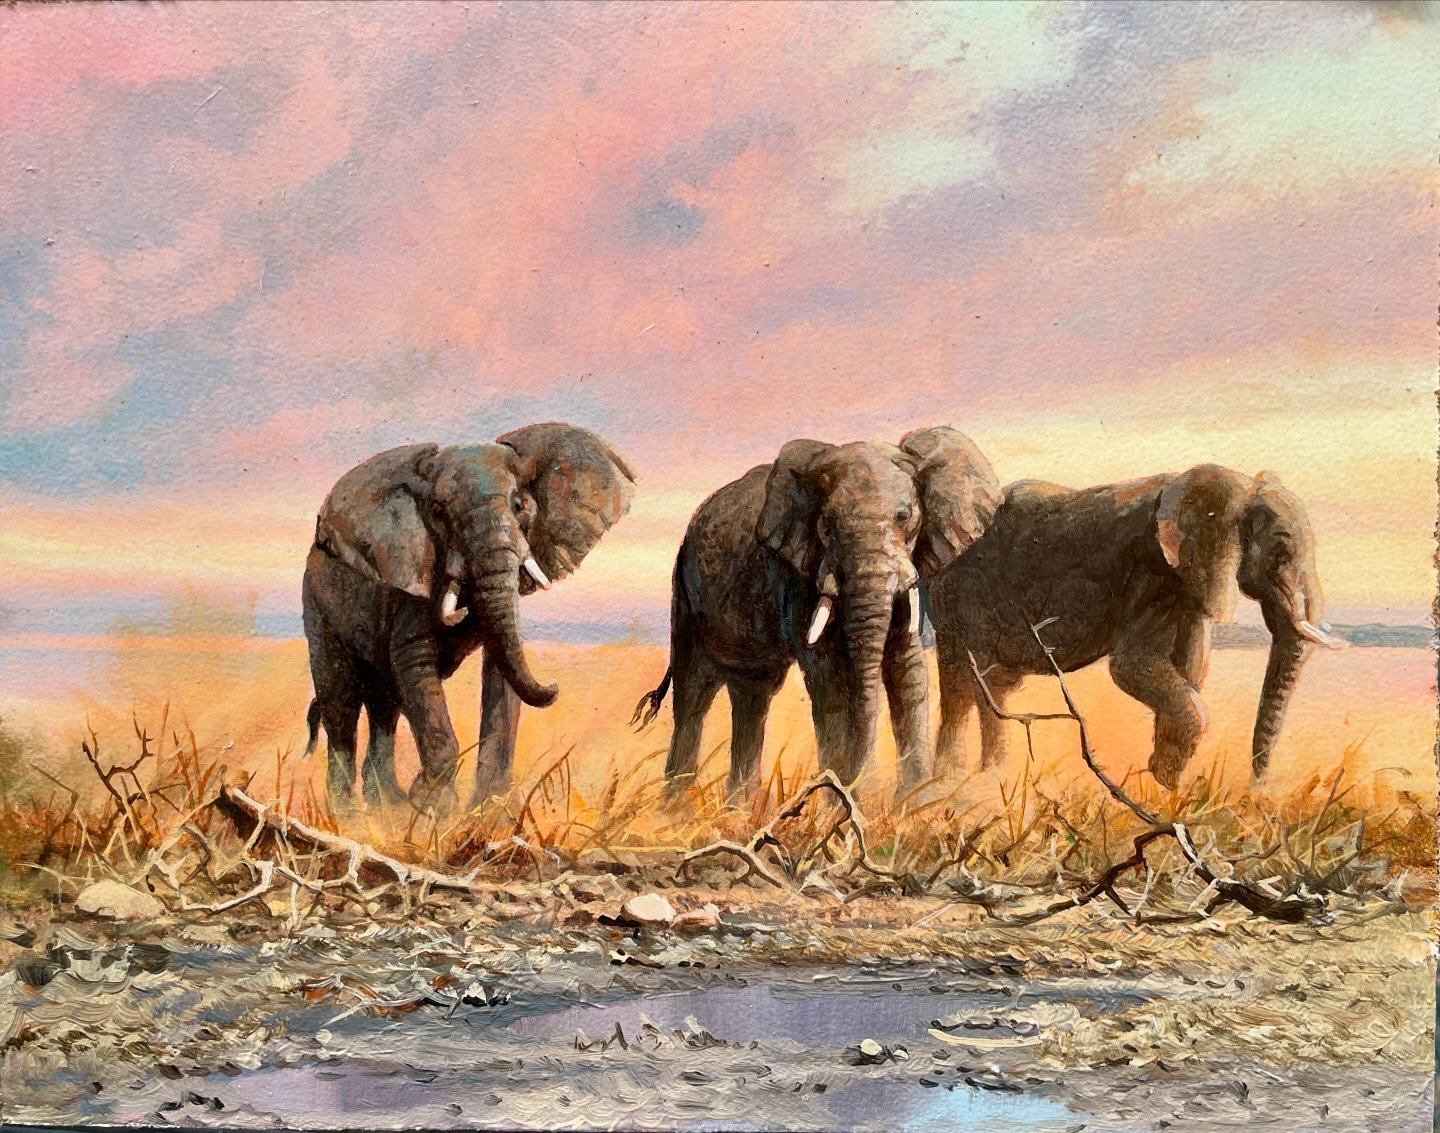 Ending the day at the waterhole as the light changes to sunset. #craigboneartist #elephants